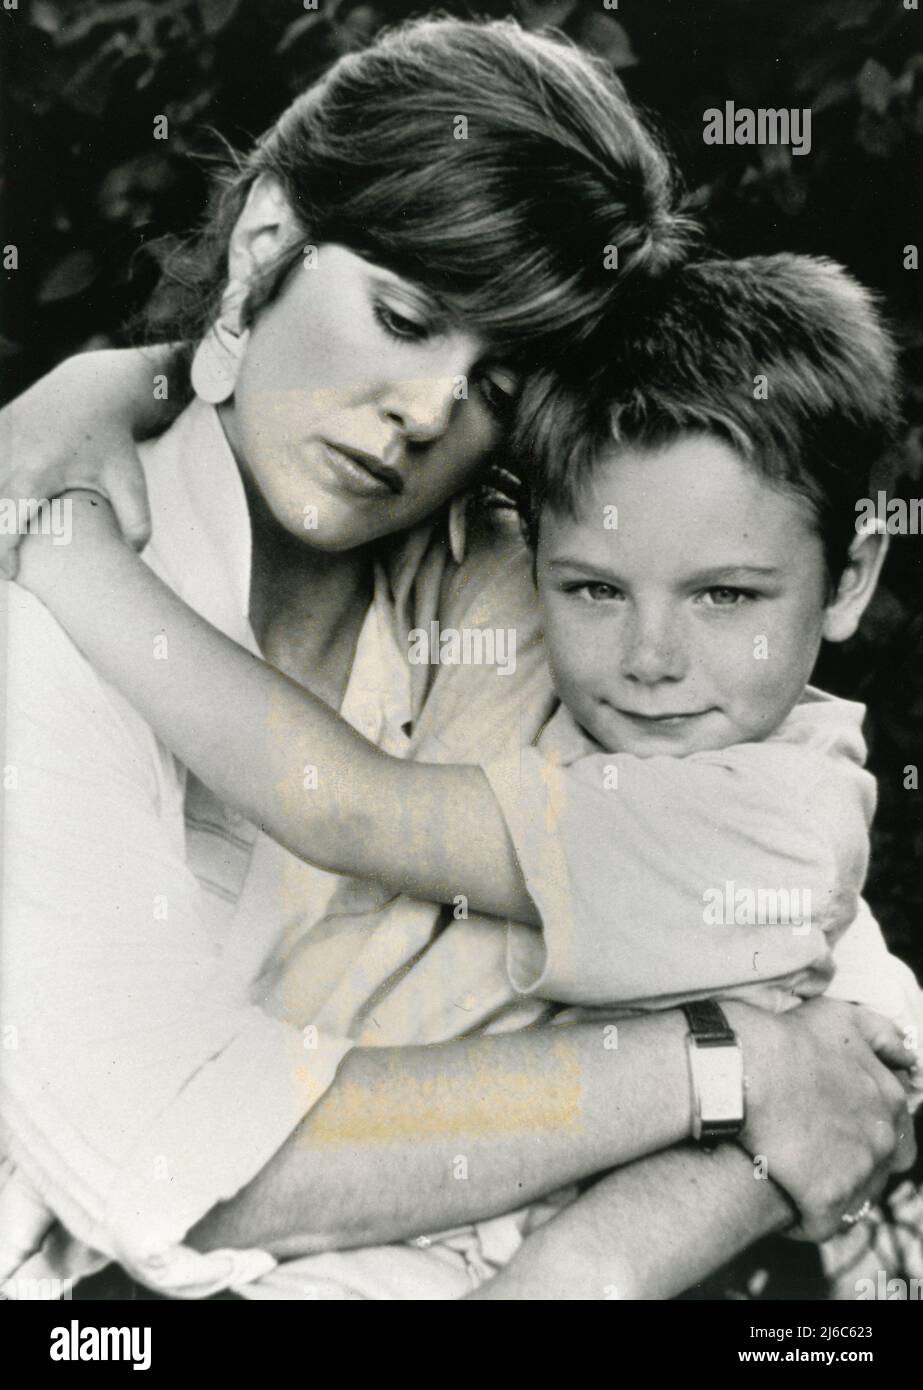 American actress Pam Dawber and child actor Brian Bonsall in the movie Do You Know the Muffin Man?, USA 1989 Stock Photo